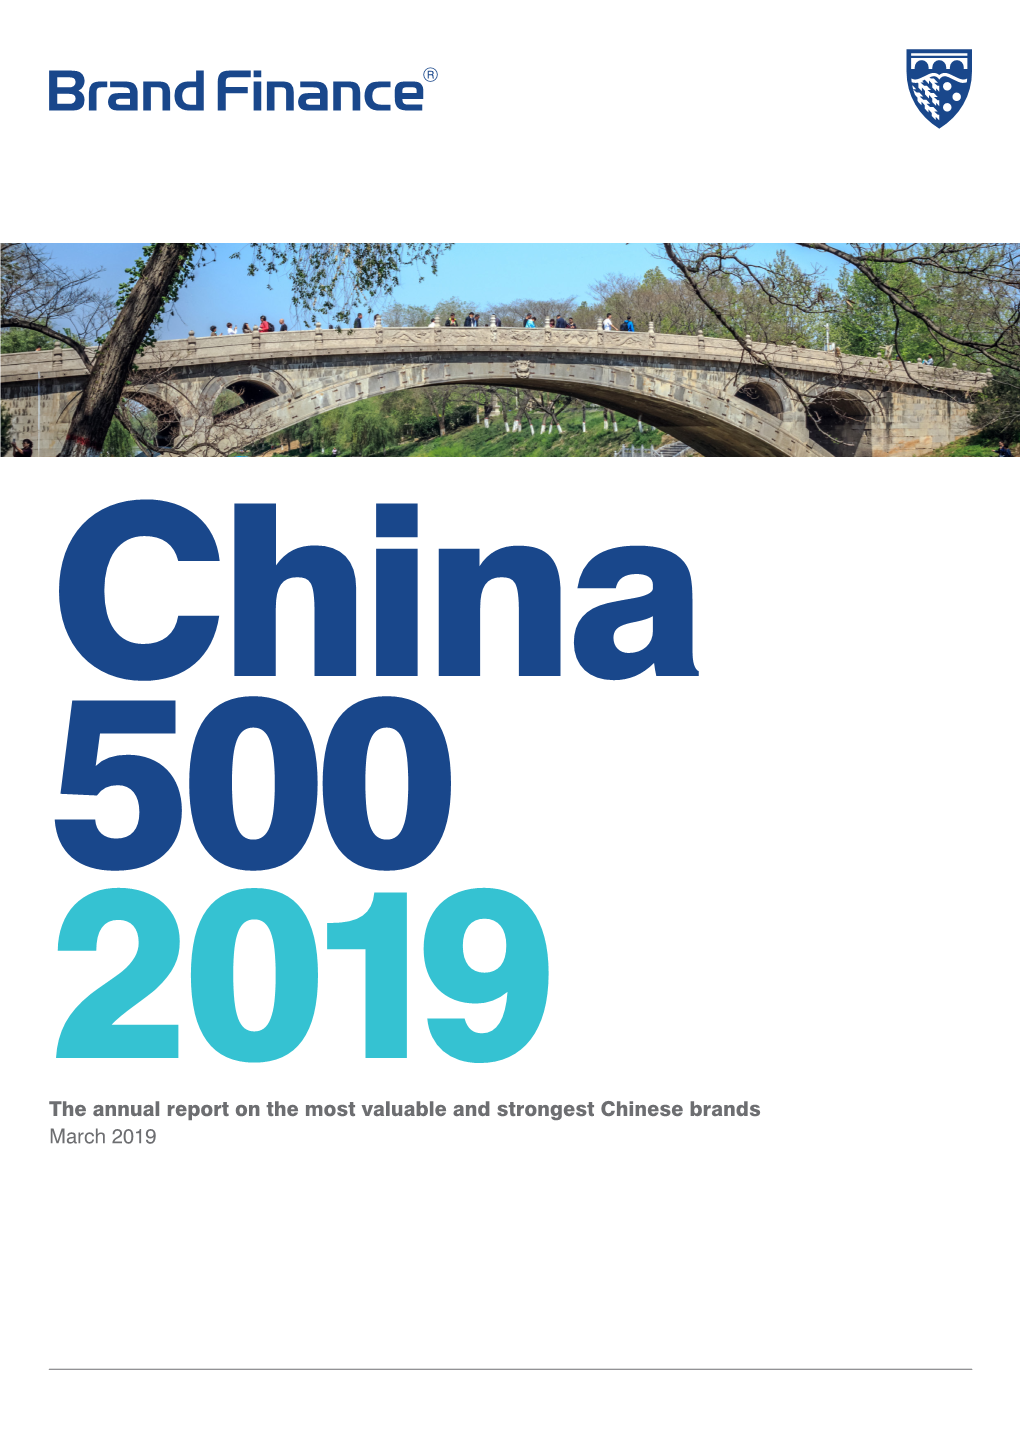 China 500 2019 the Annual Report on the Most Valuable and Strongest Chinese Brands March 2019 Contents